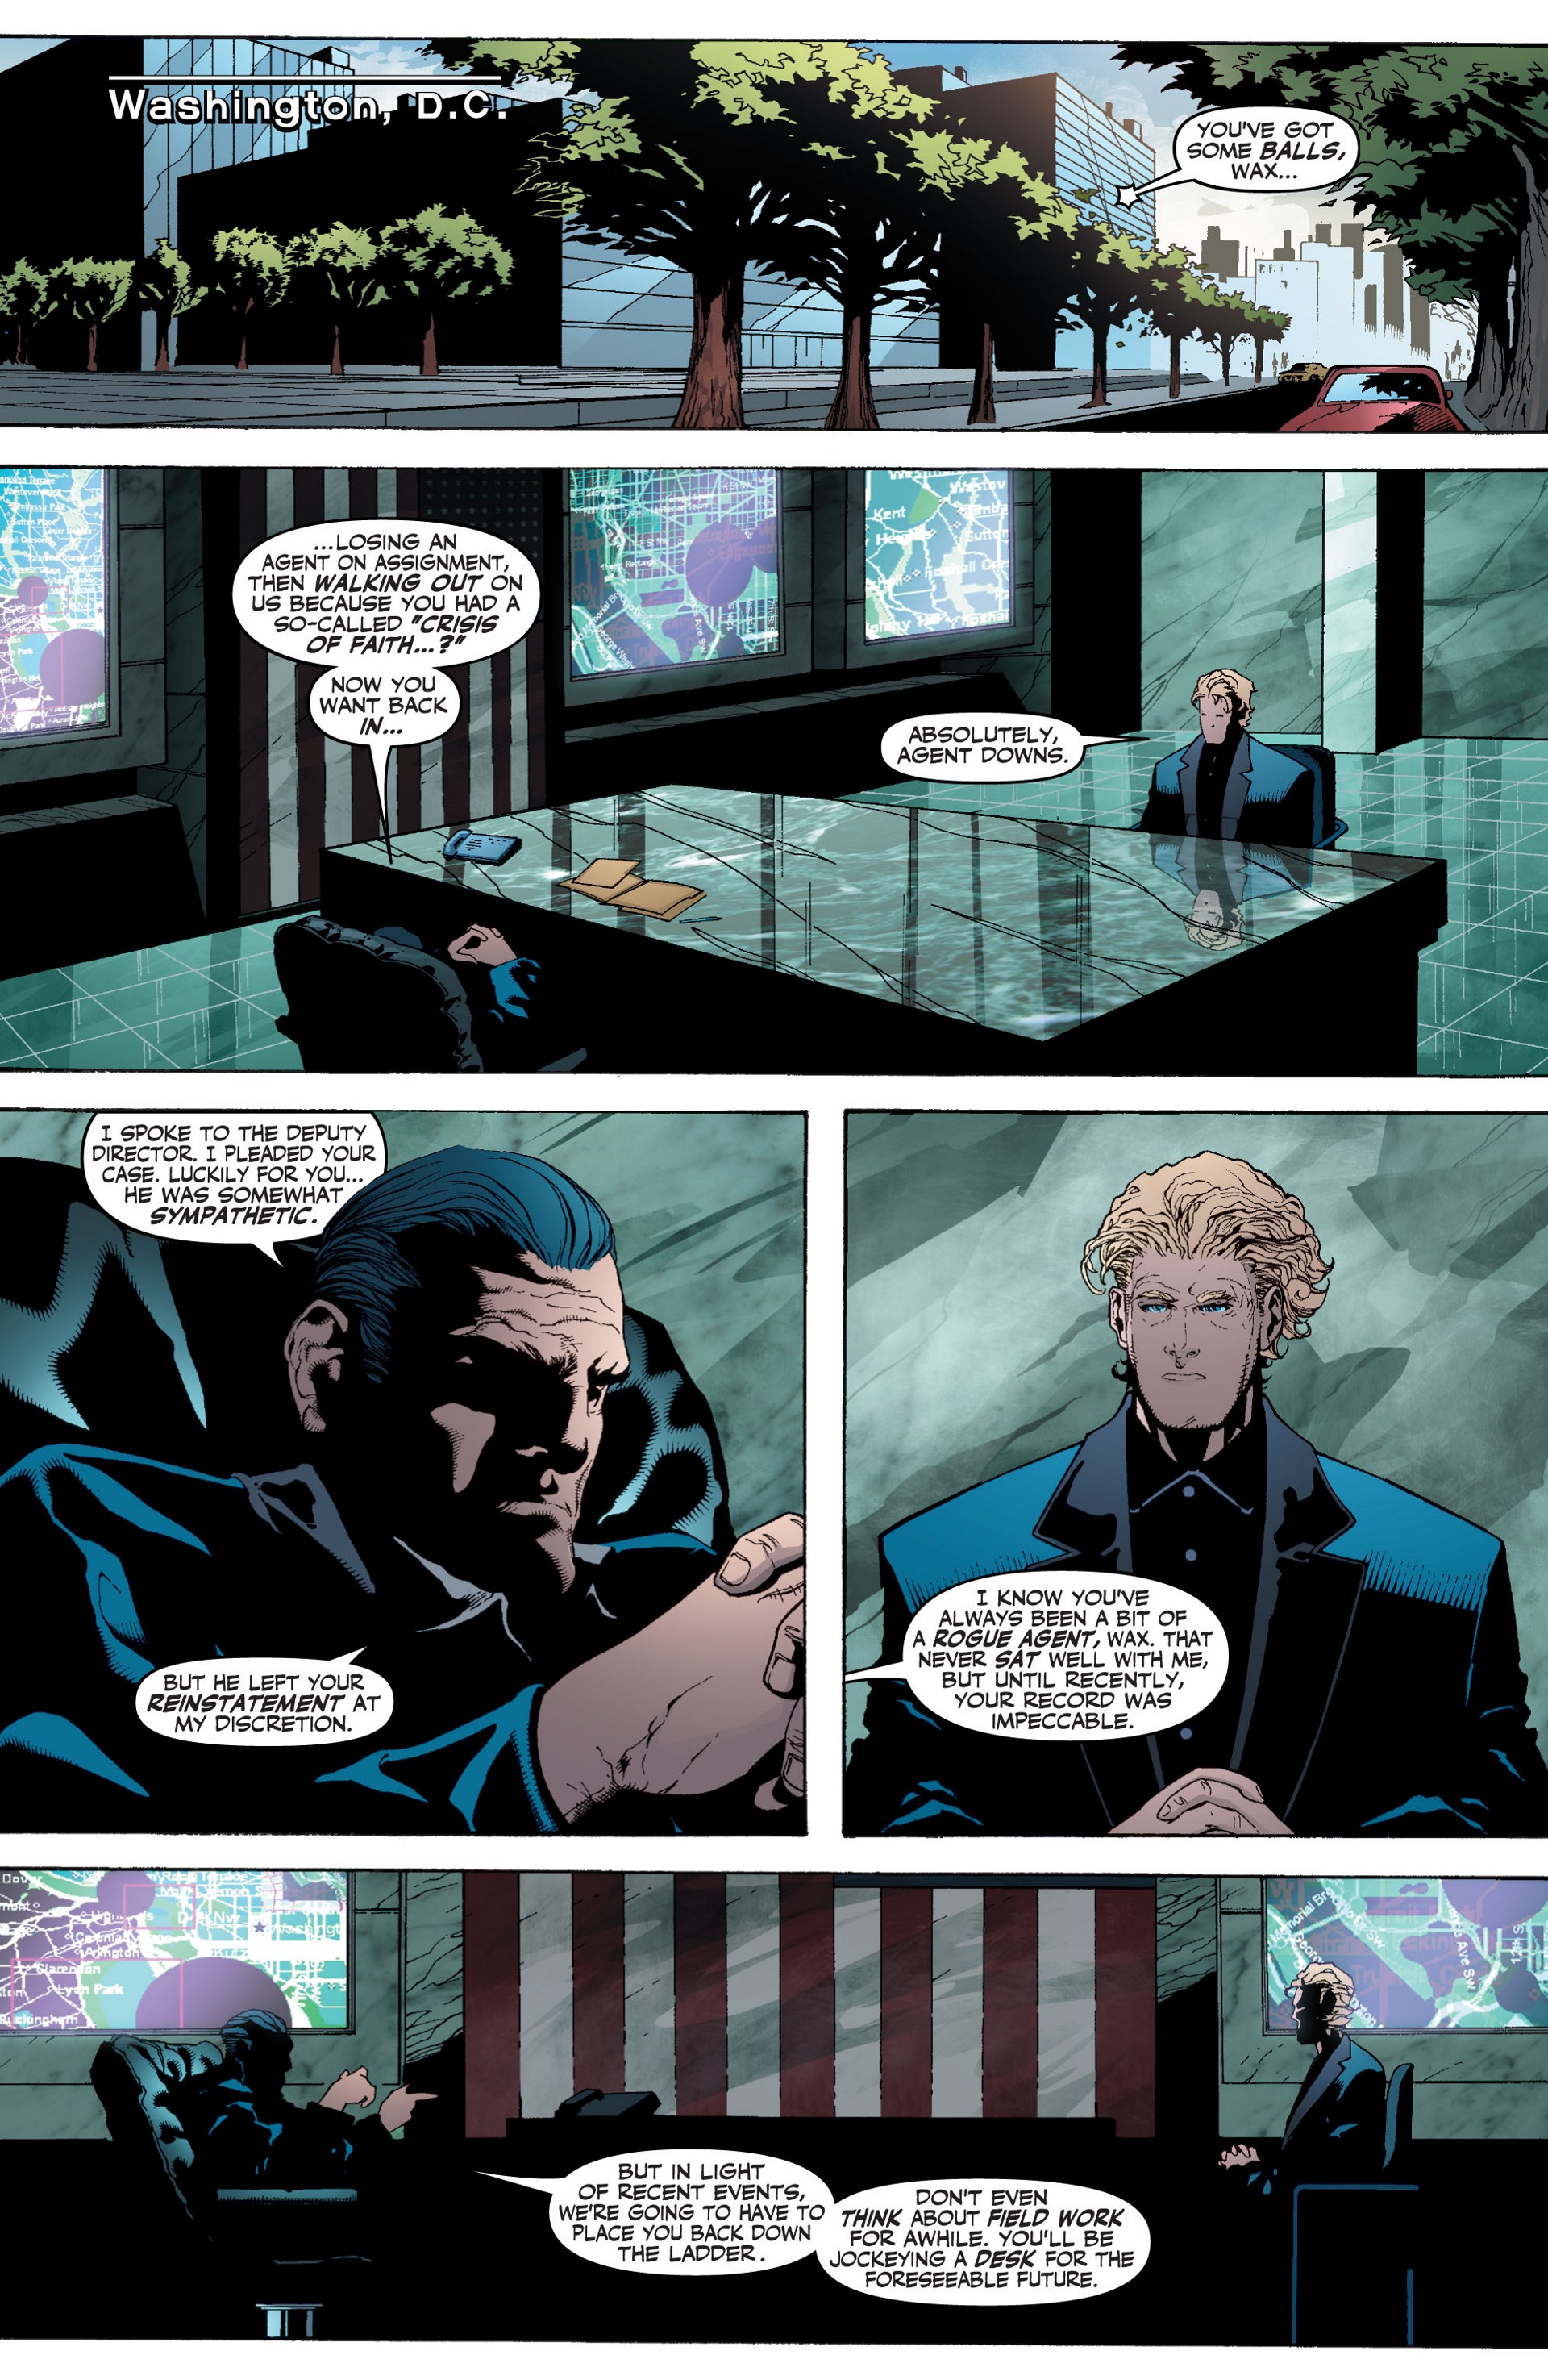 Wildcats Version 3.0 Issue #1 #1 - English 5